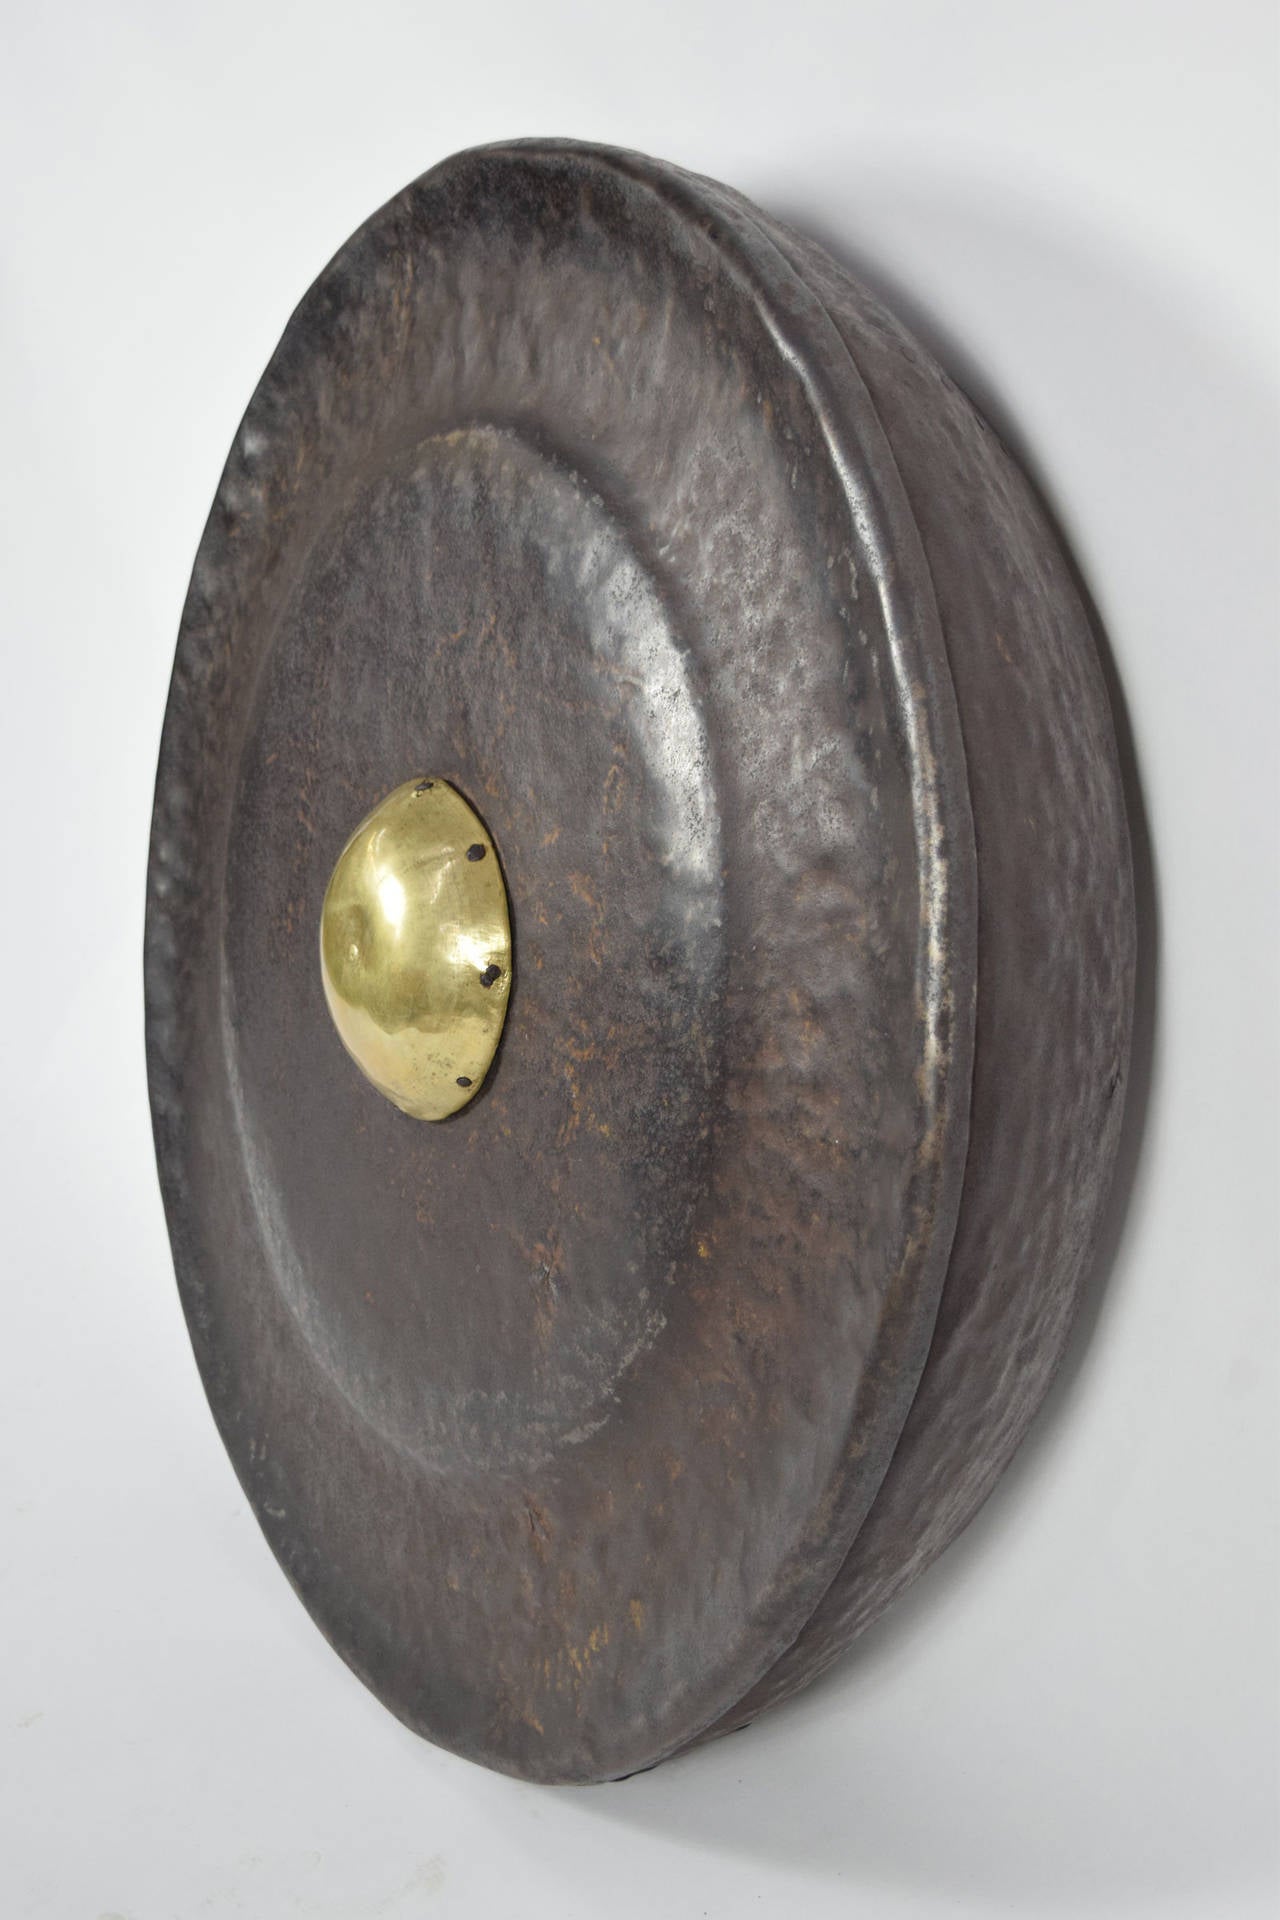 Ancient African gong. Makes a magical wall decor with beautiful patina.